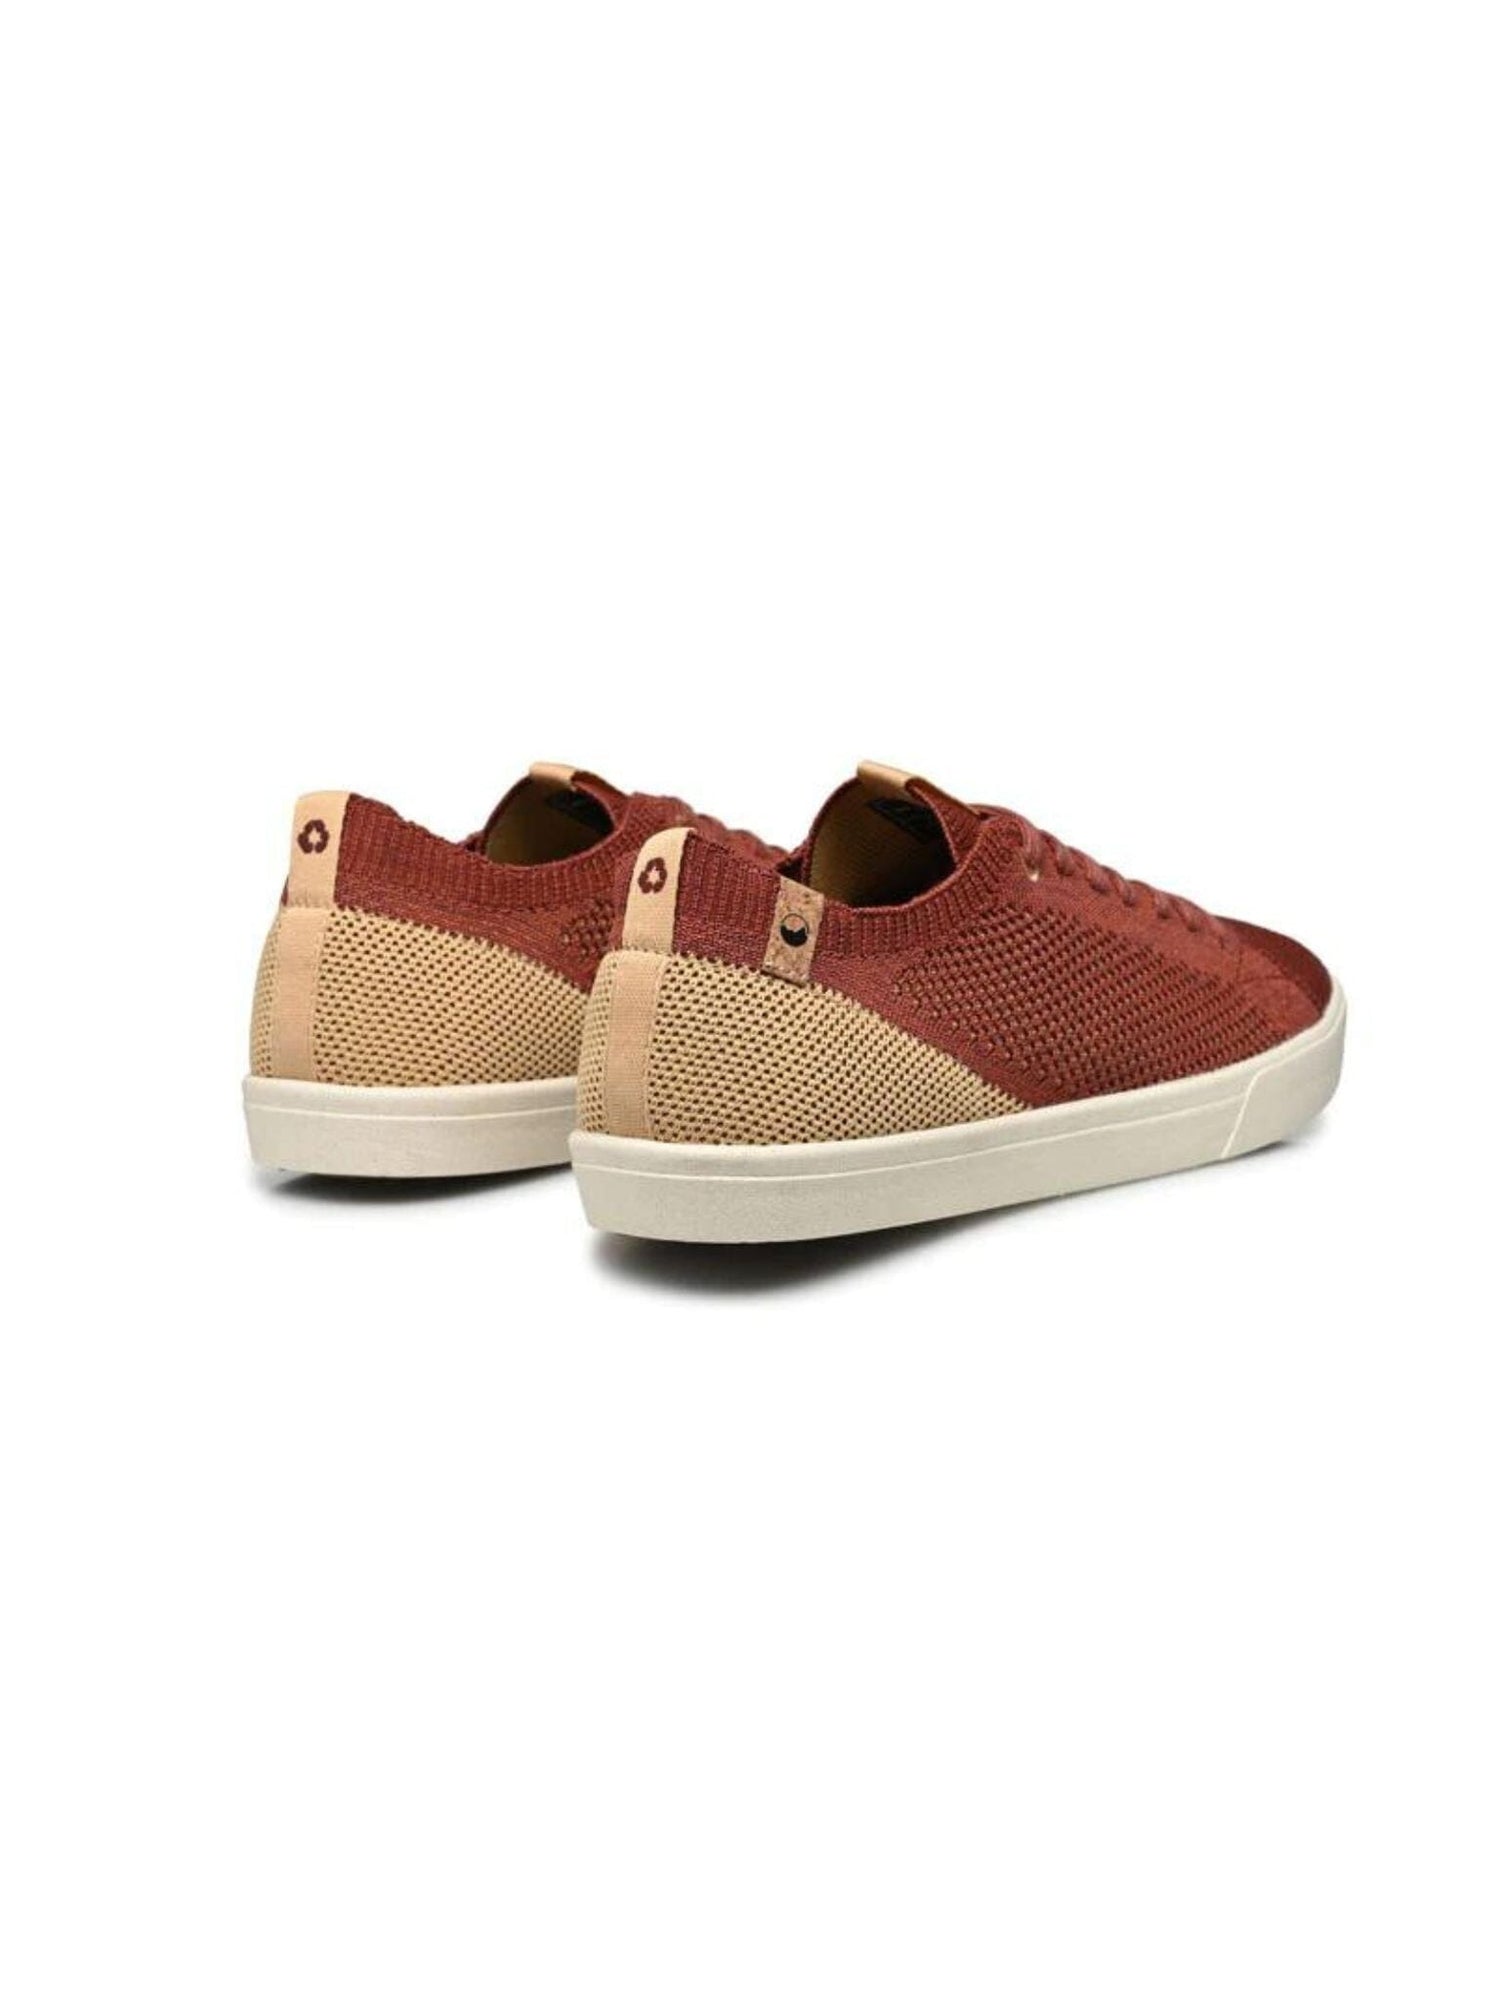 Saola M's Cannon Knit - Recycled PET Burgundy-Sand Shoes